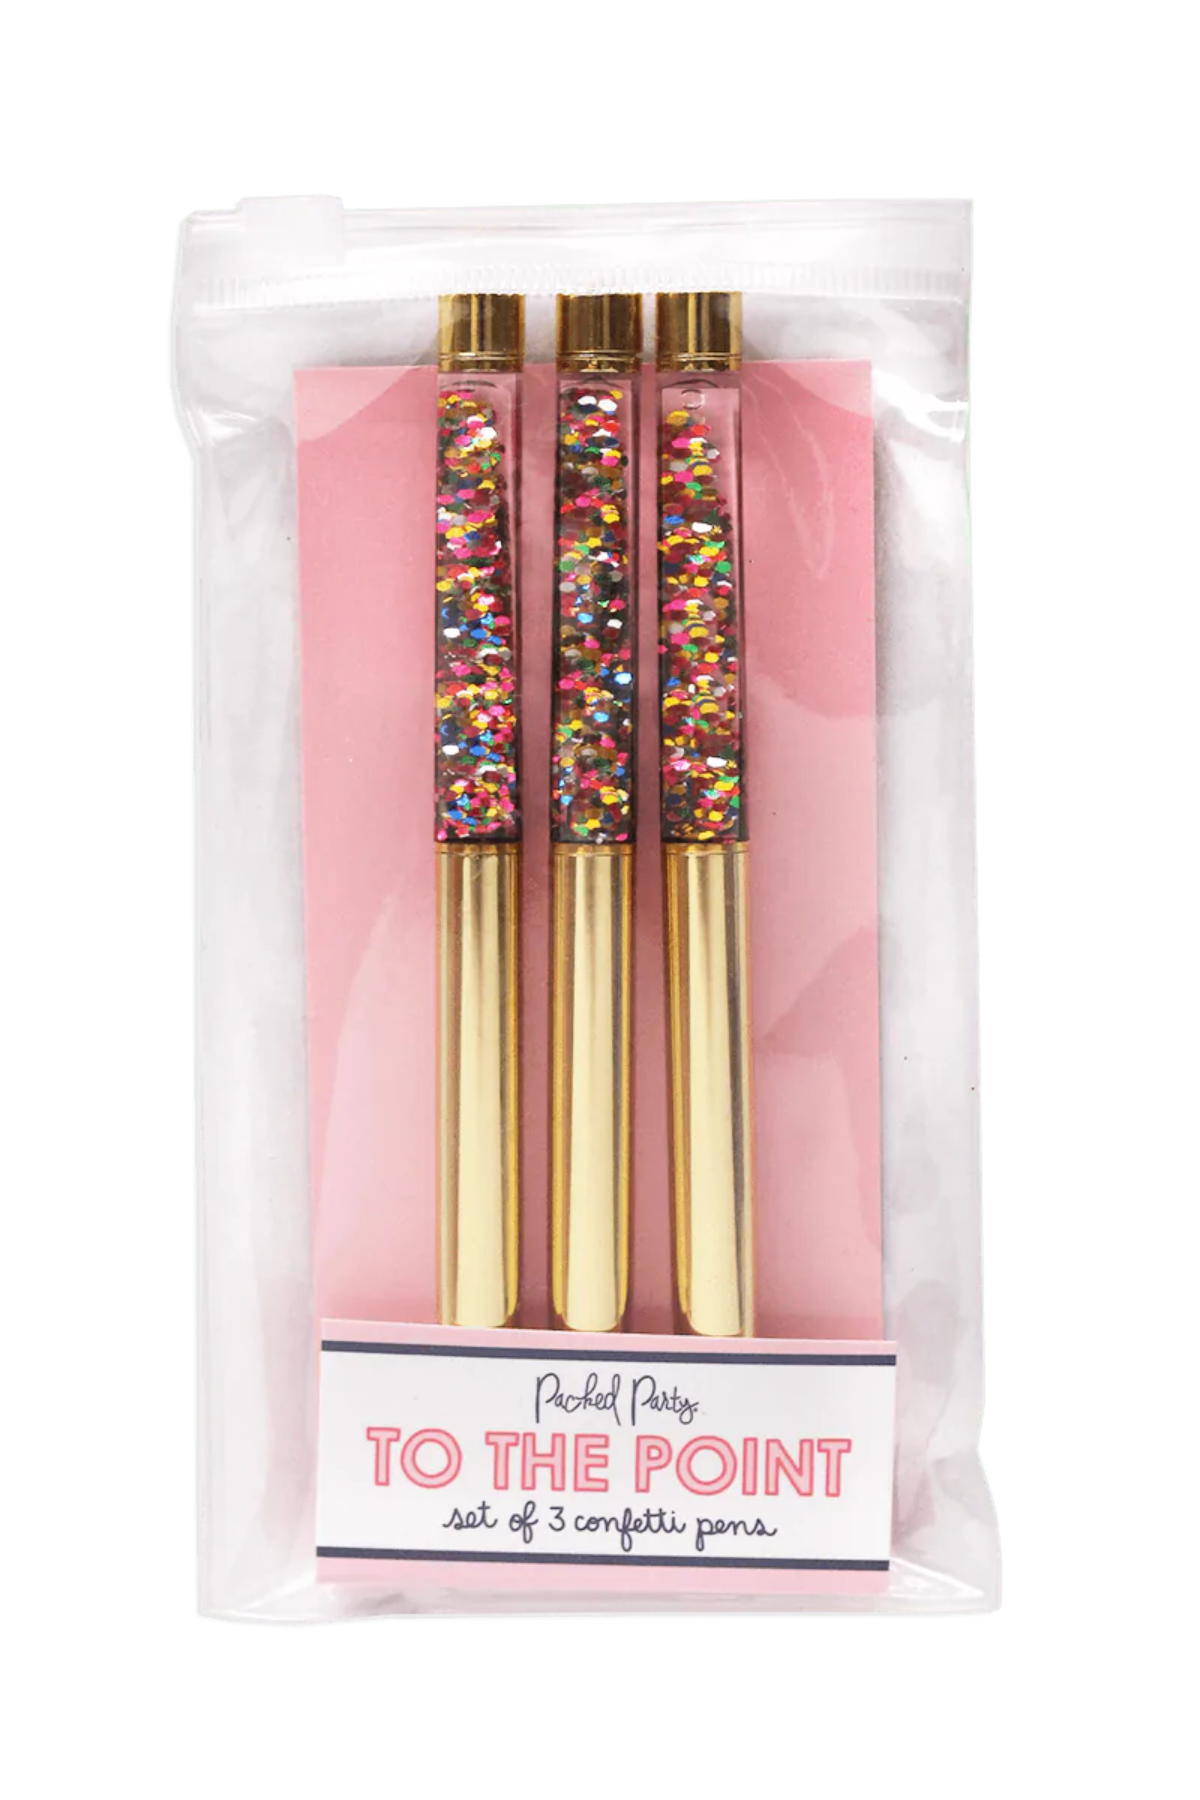 To The Point Confetti Pen Set of 3